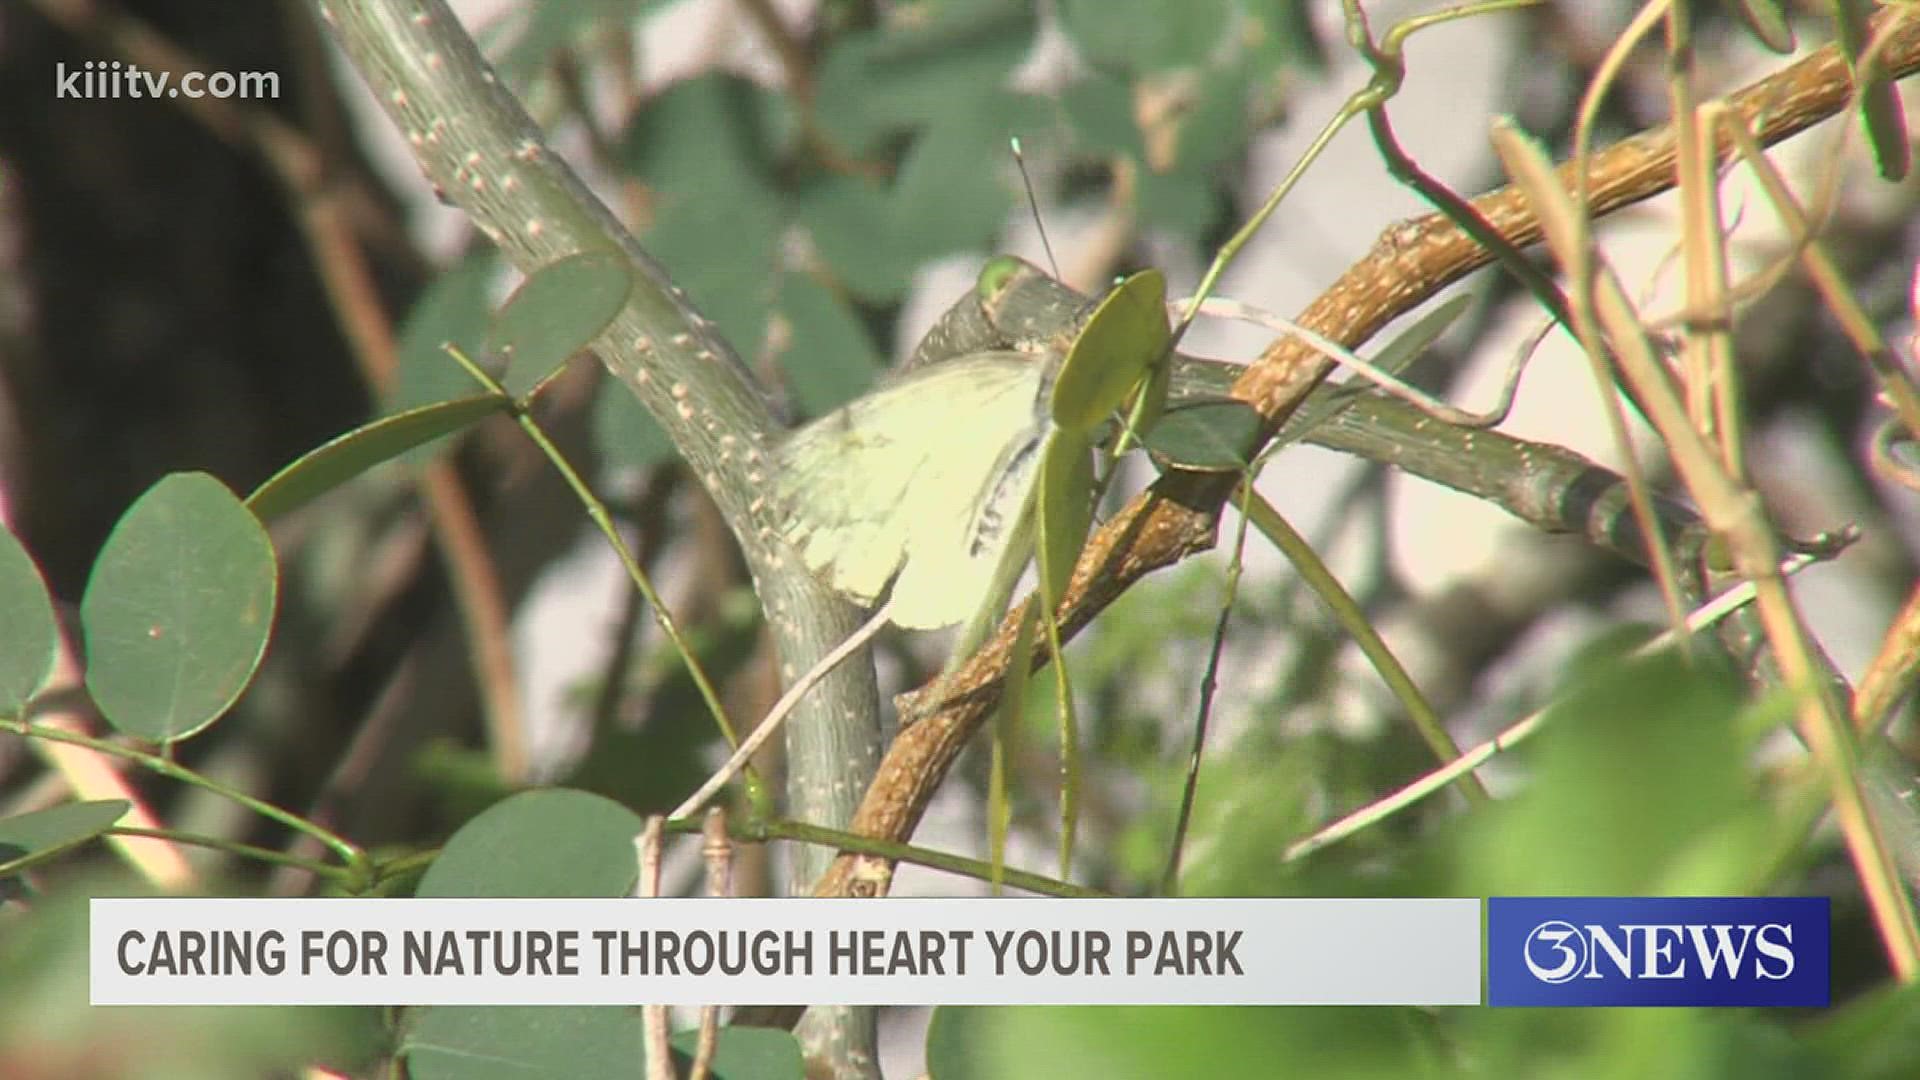 The clean-up took place at Hans Suter Wildlife Refuge to ensure that spring and summer butterfly populations have a nice area to land and spend time.